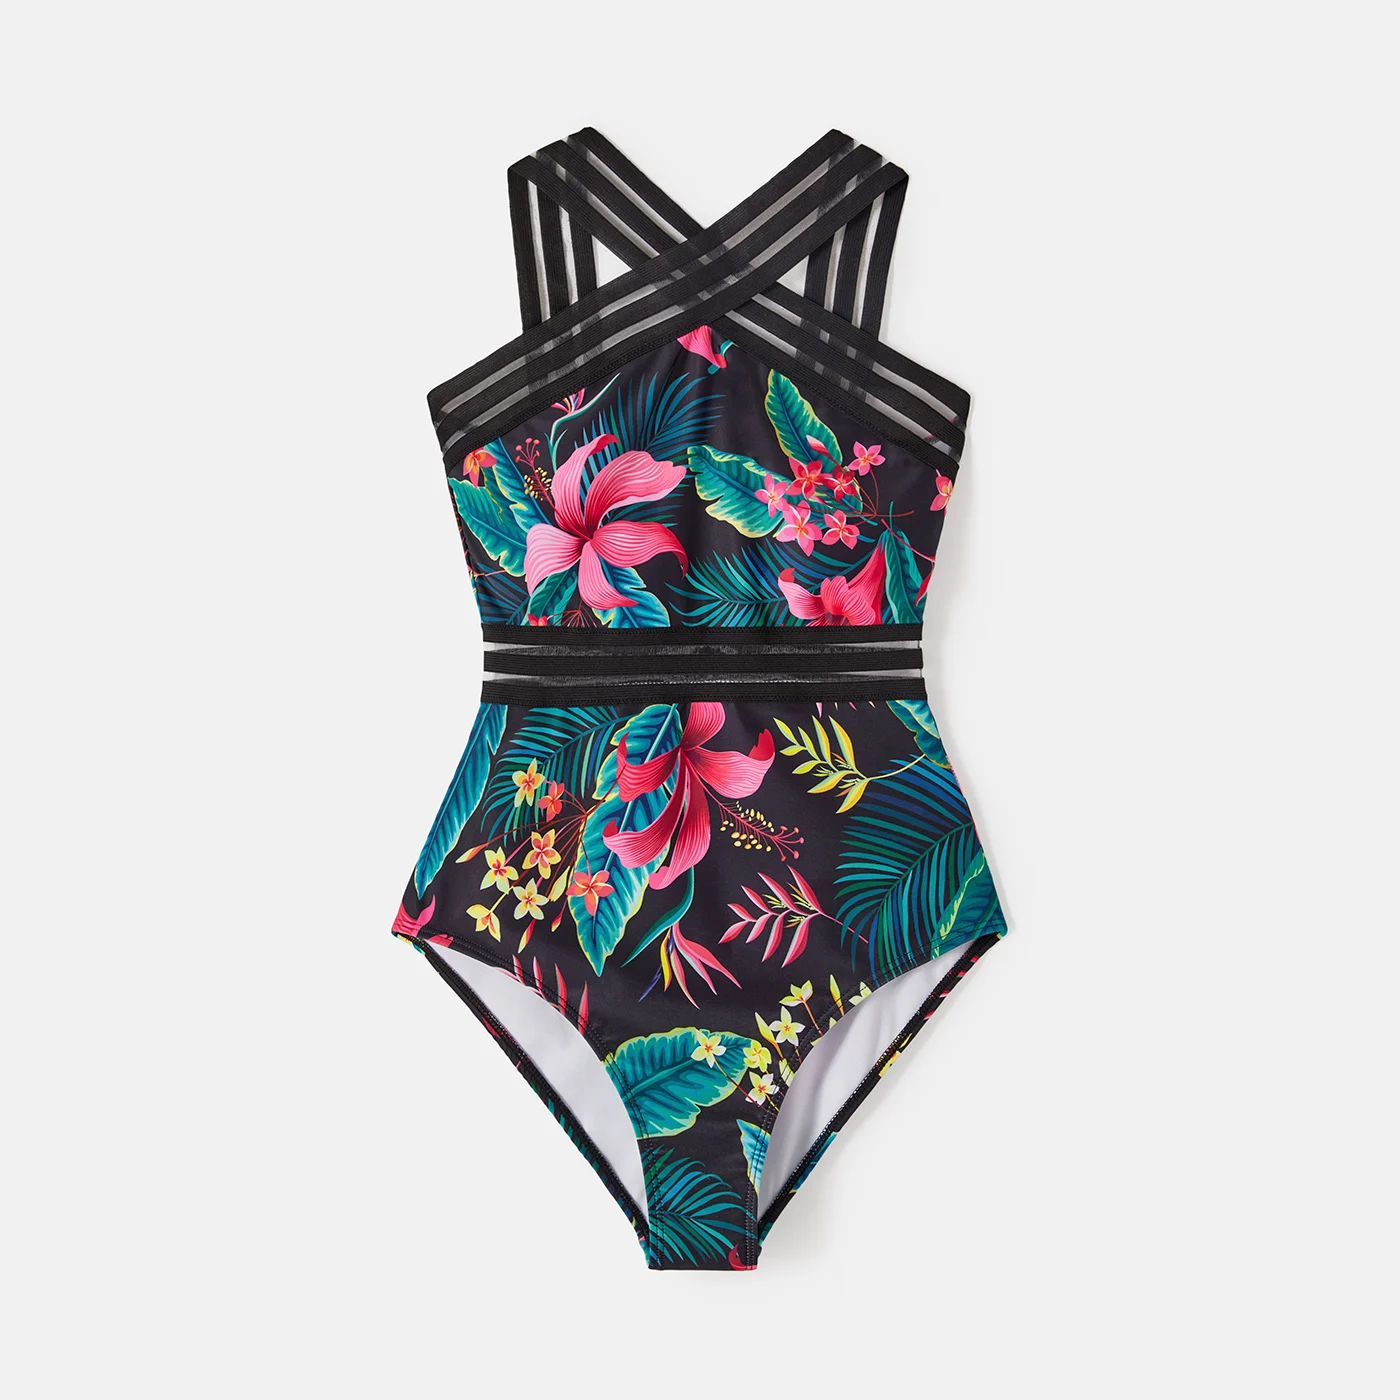 Patpat Family Combation Swimsuith Allover Plant Printe